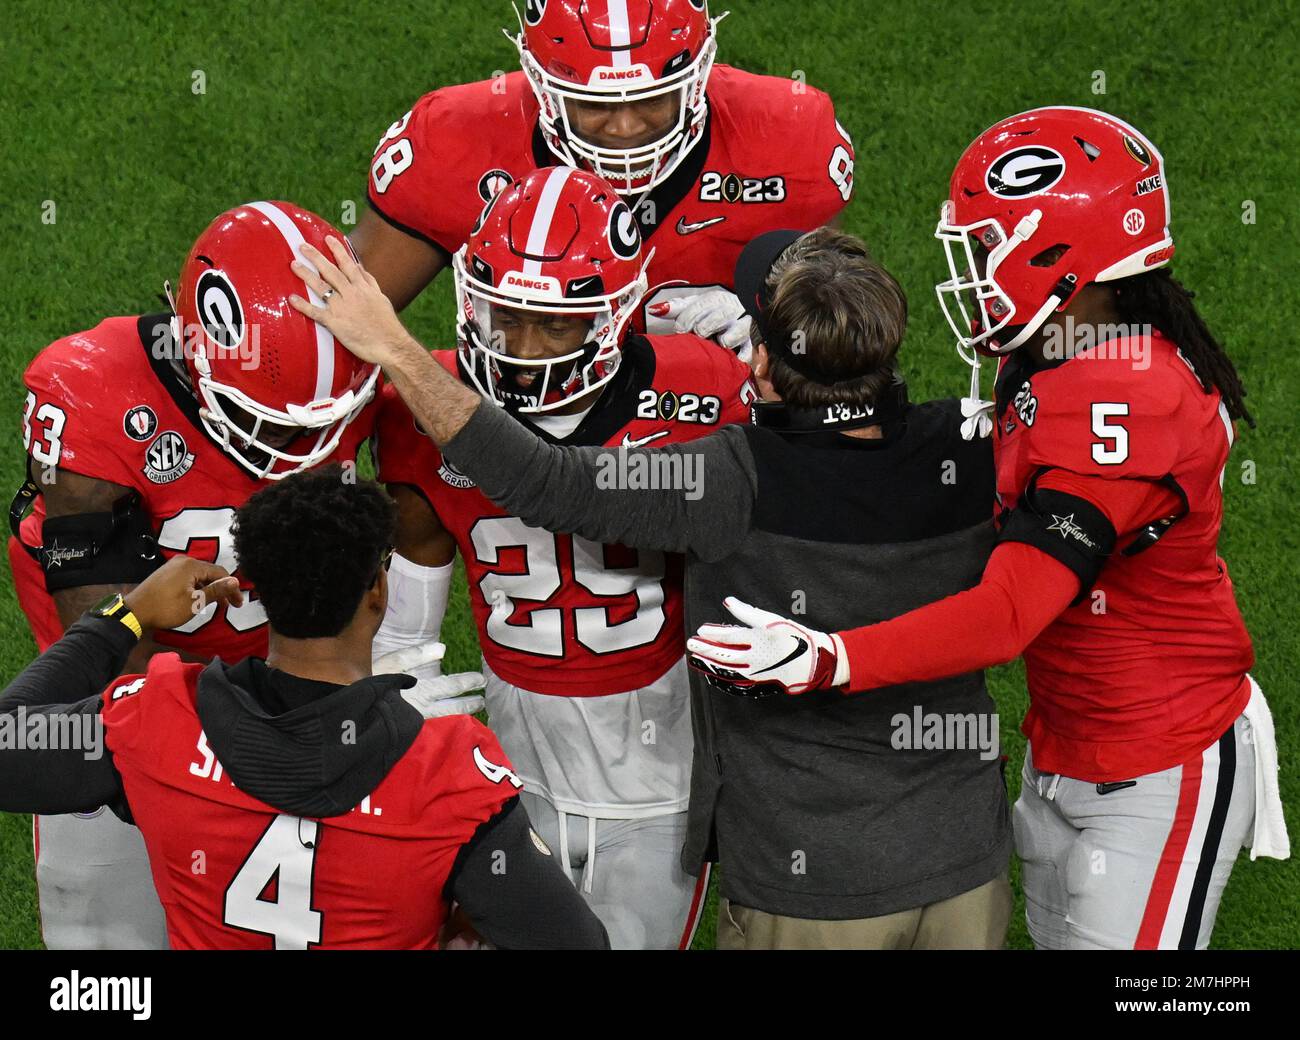 Inglewood, United States. 09th Jan, 2023. Georgia head coach Kirby Smart congratulates players after the 2023 NCAA College Football National Championship against TCU at SoFi Stadium in Inglewood, California, on Monday, January 9, 2023. The Bulldogs defeated the TCU Horned Frogs 65-7. Photo by Jon SooHoo/UPI Credit: UPI/Alamy Live News Stock Photo